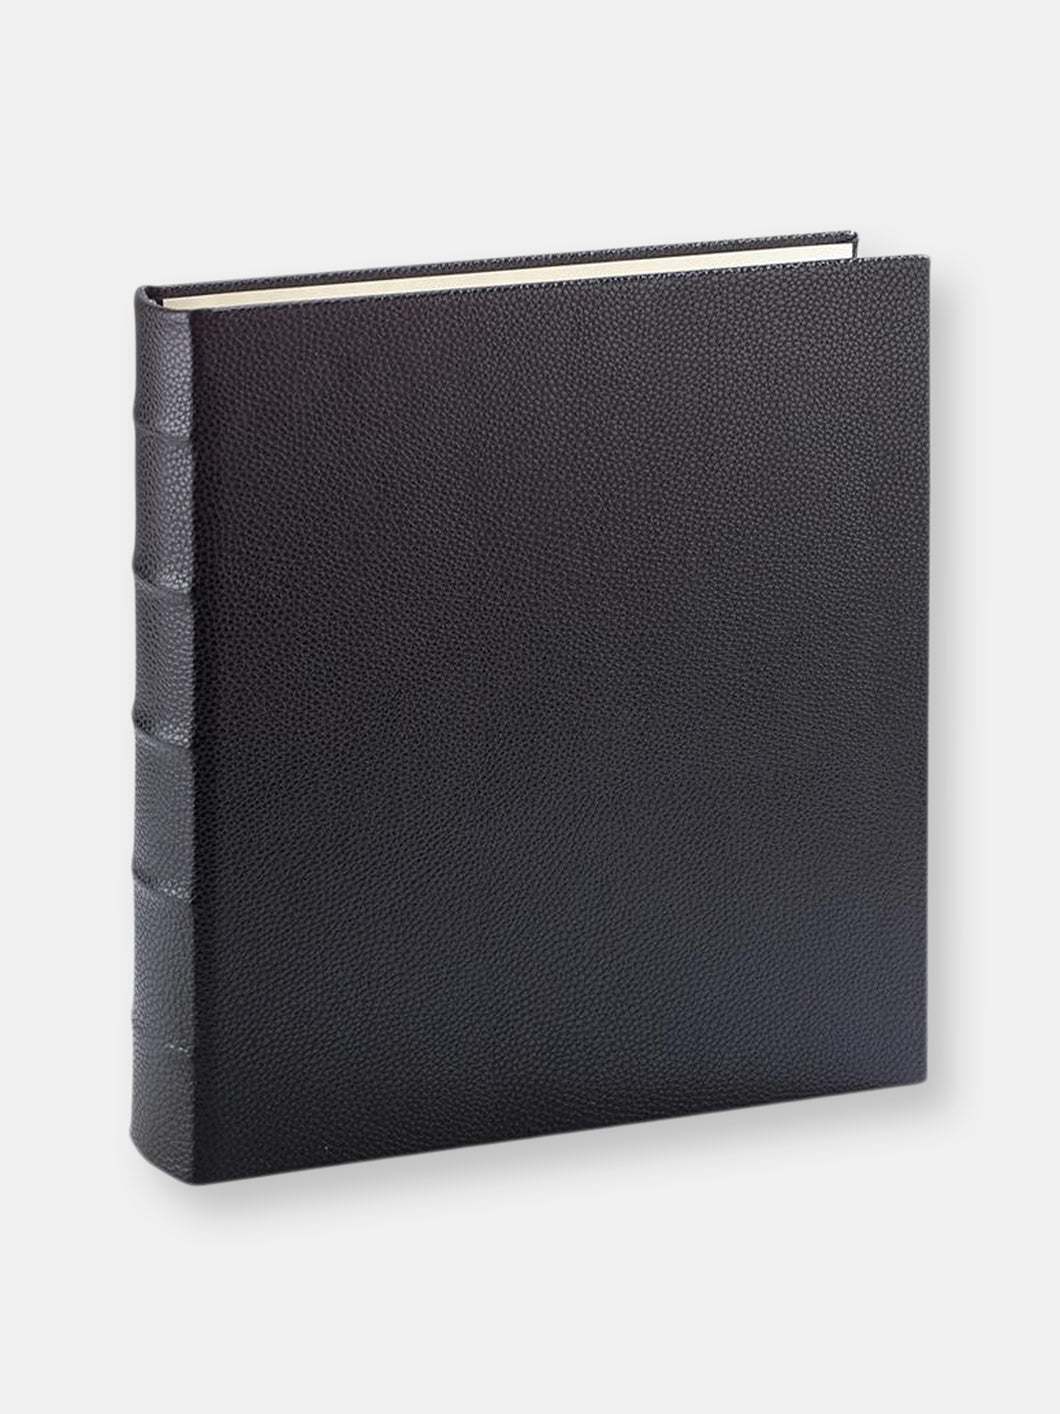 Large Ring Clear Pocket Album - Leather